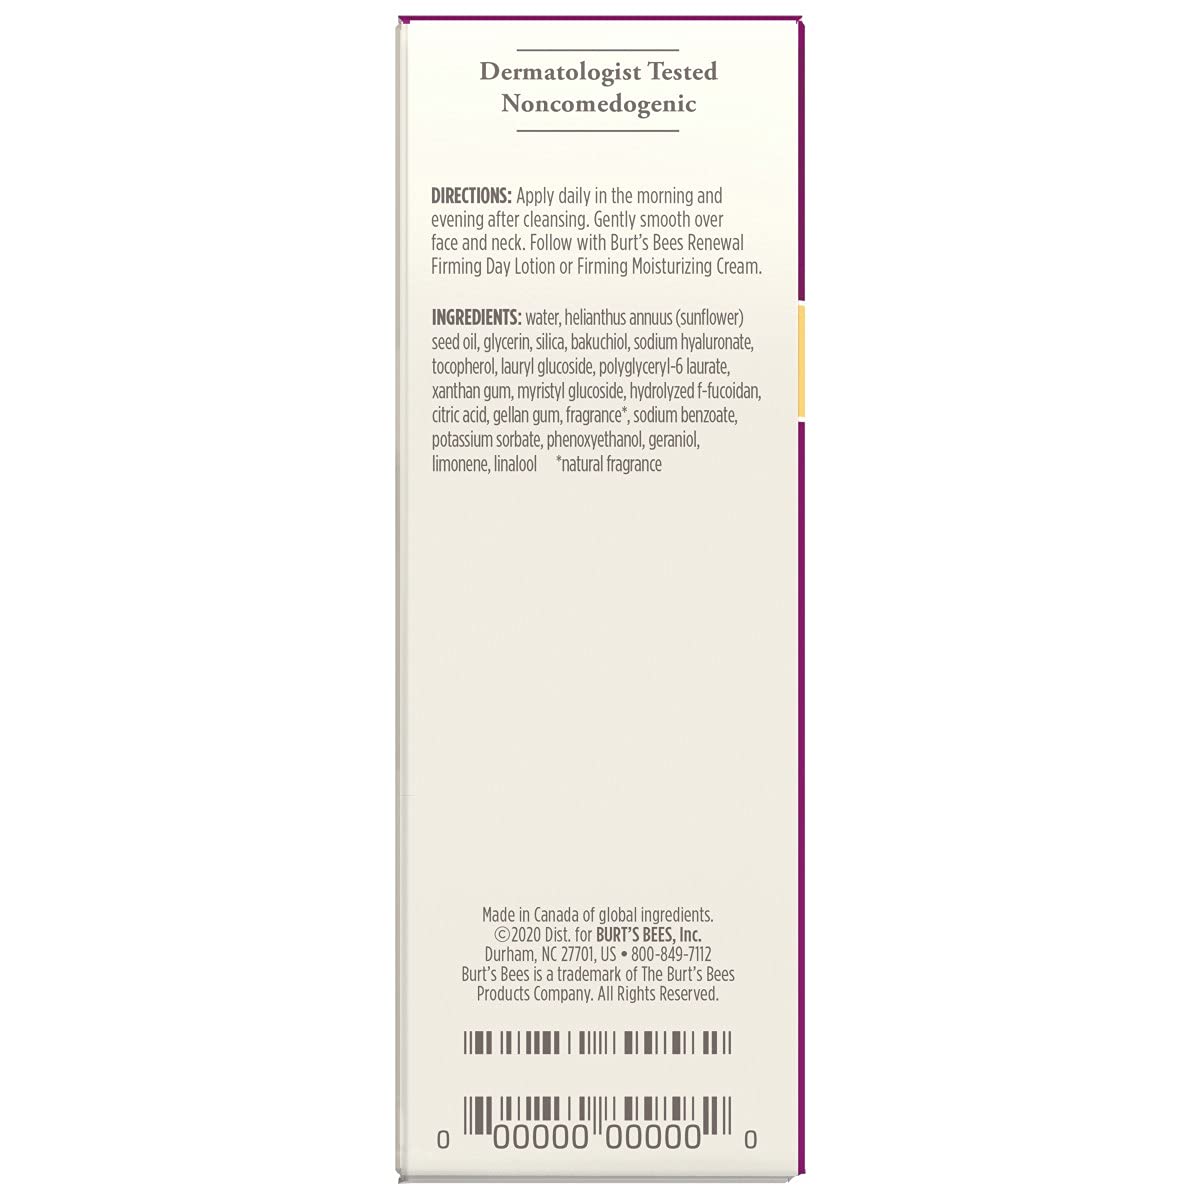 Burt's Bees Face Serum, Retinol Alternative, Facial Care with Hyaluronic Acid, Intensive Firming Skin Care, 1 Ounce